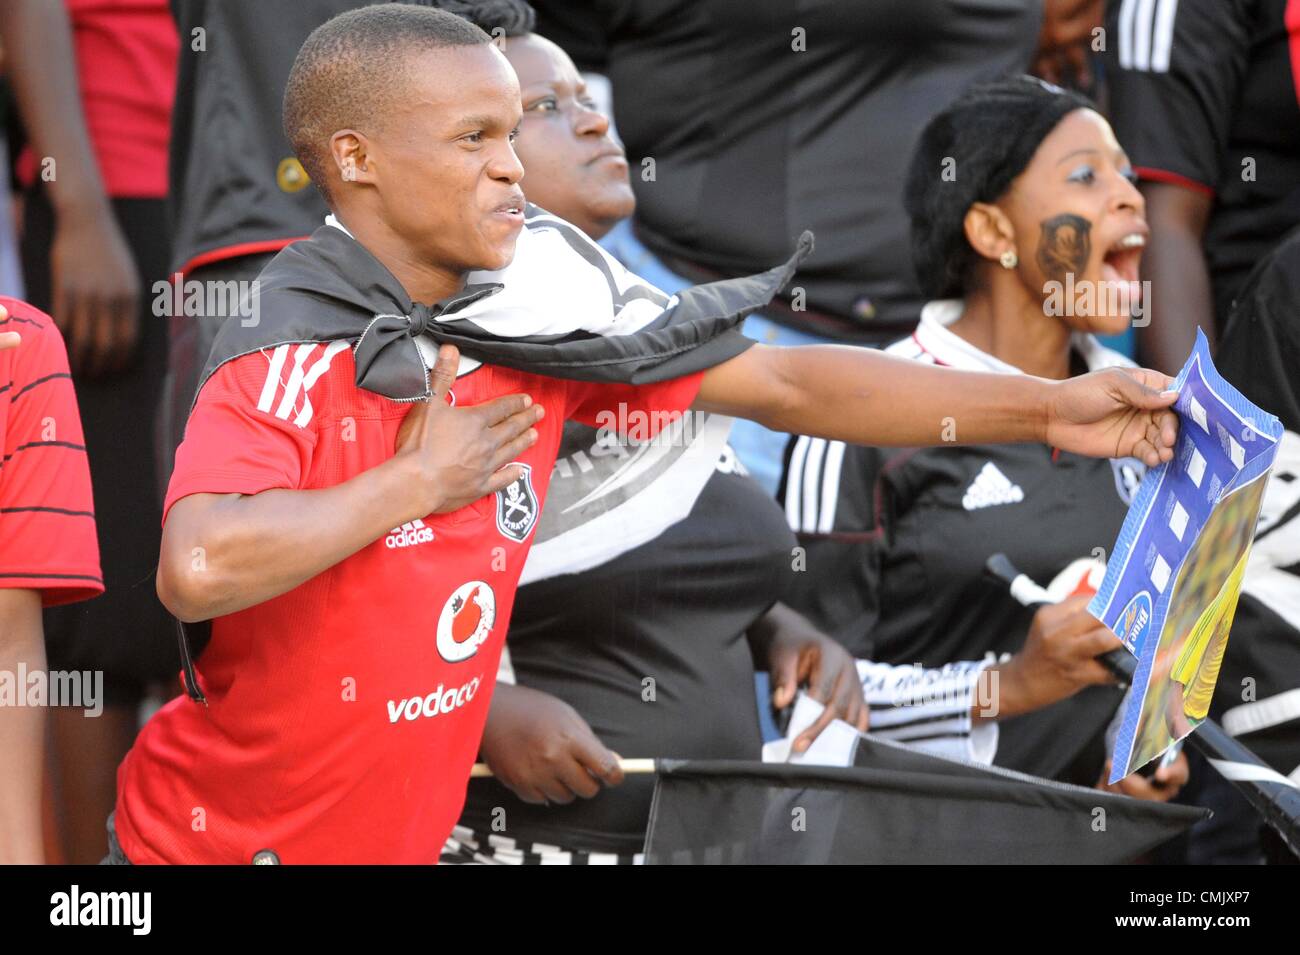 POLOKWANE, SOUTH AFRICA - AUGUST 19, fans during the MTN 8 1st leg semi final match between SuperSport United and Orlando Pirates at Peter Mokaba Stadium on August 19, 2012 in Polokwane, South Africa Photo by Lee Warren / Gallo Images Stock Photo